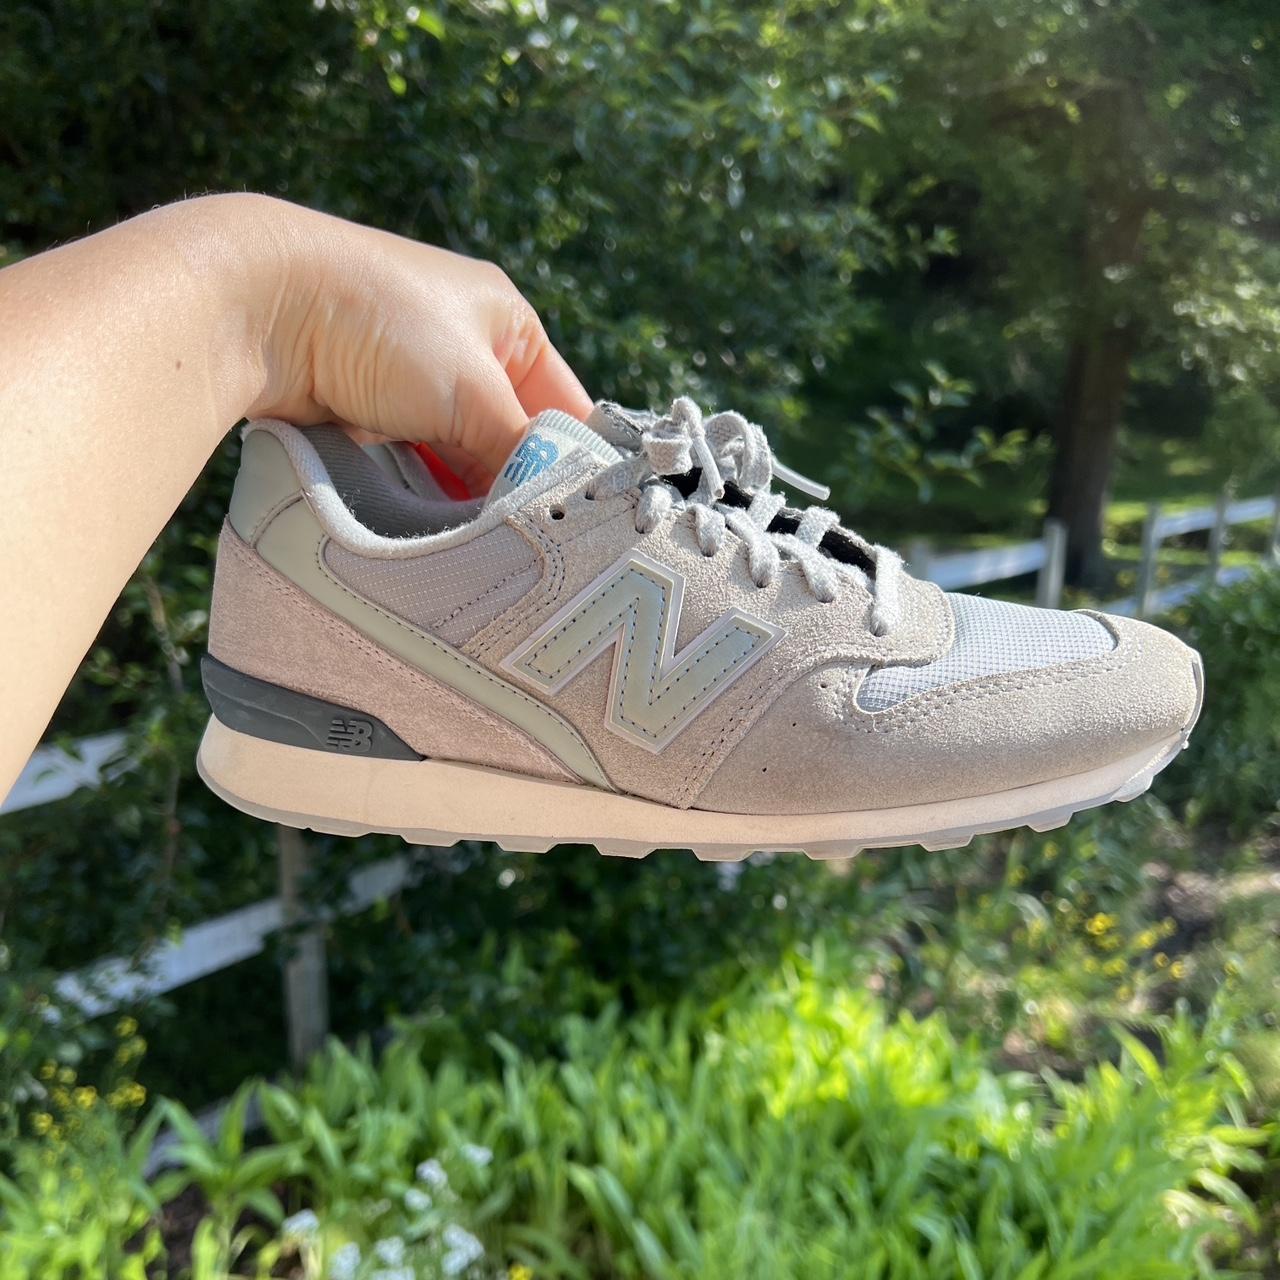 New Balance Women's Grey and Blue Trainers